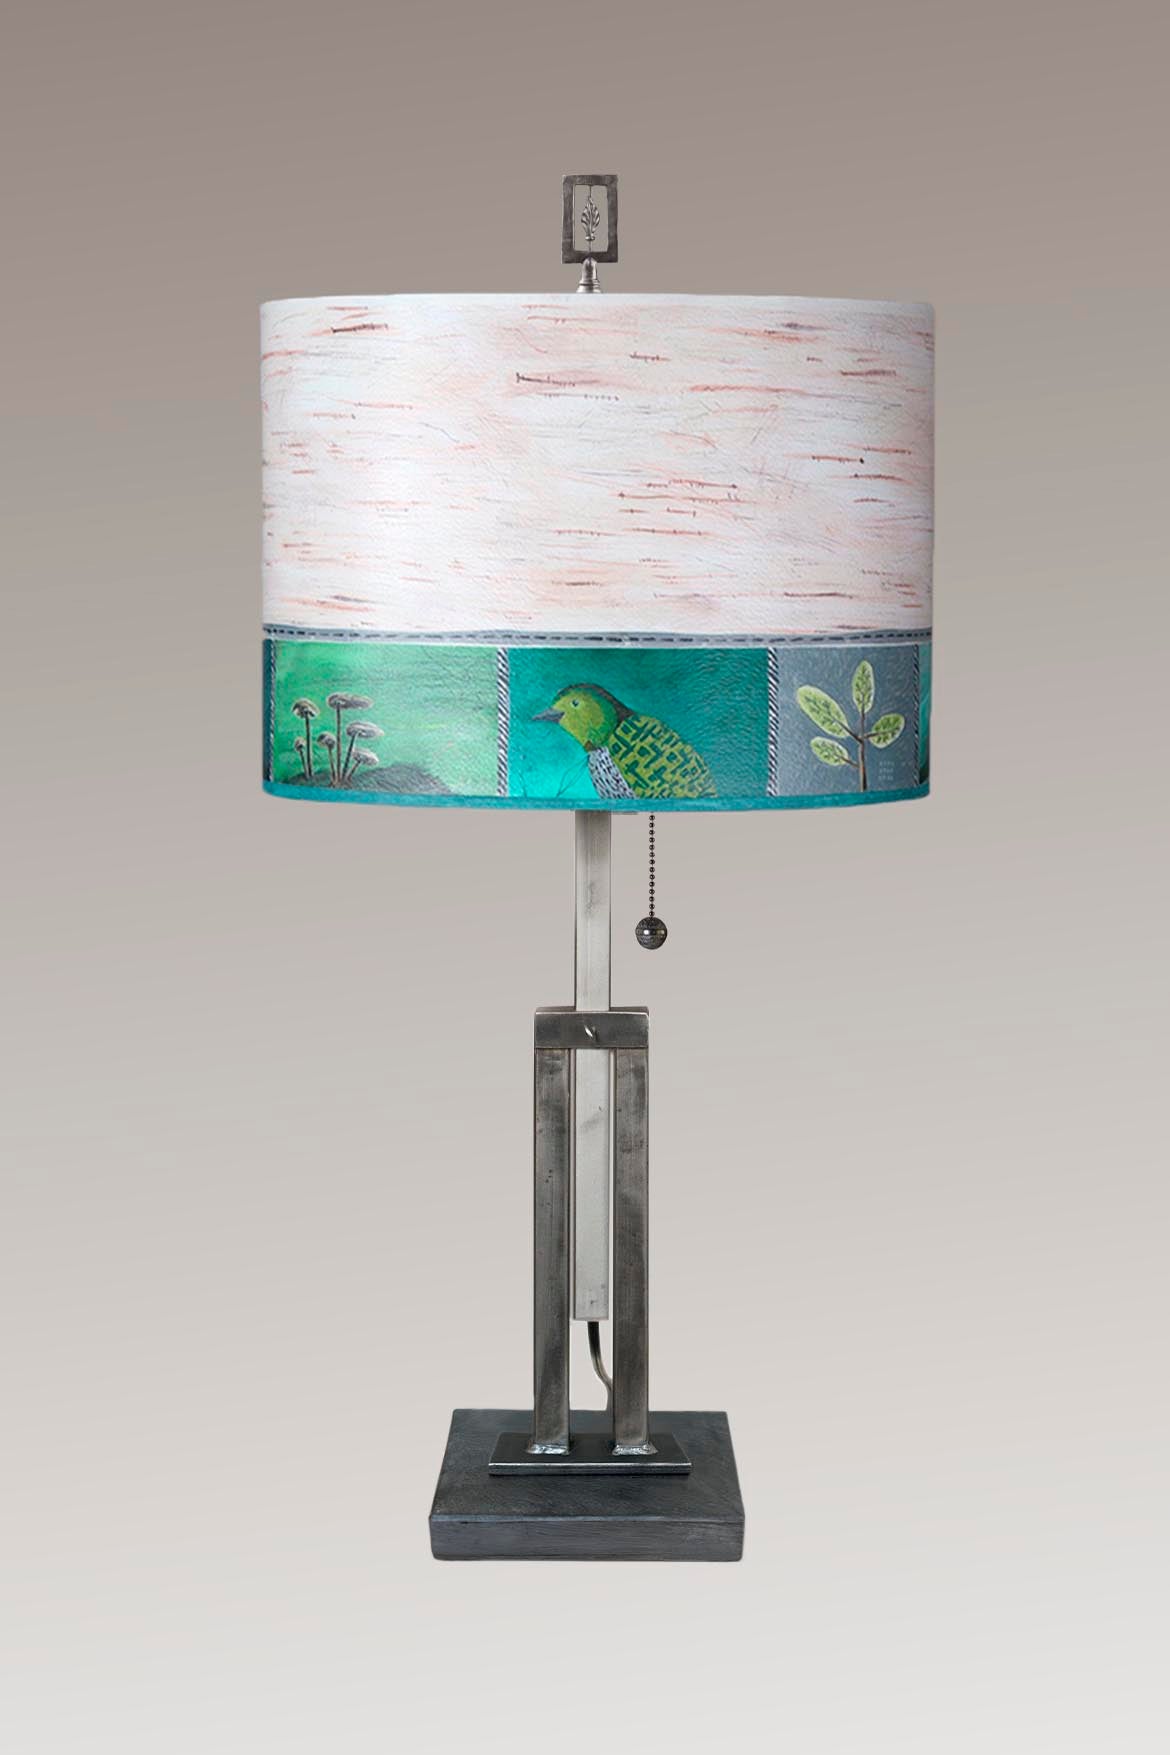 Janna Ugone & Co Table Lamp Adjustable-Height Steel Table Lamp with Large Drum Shade in Woodland Trails in Birch